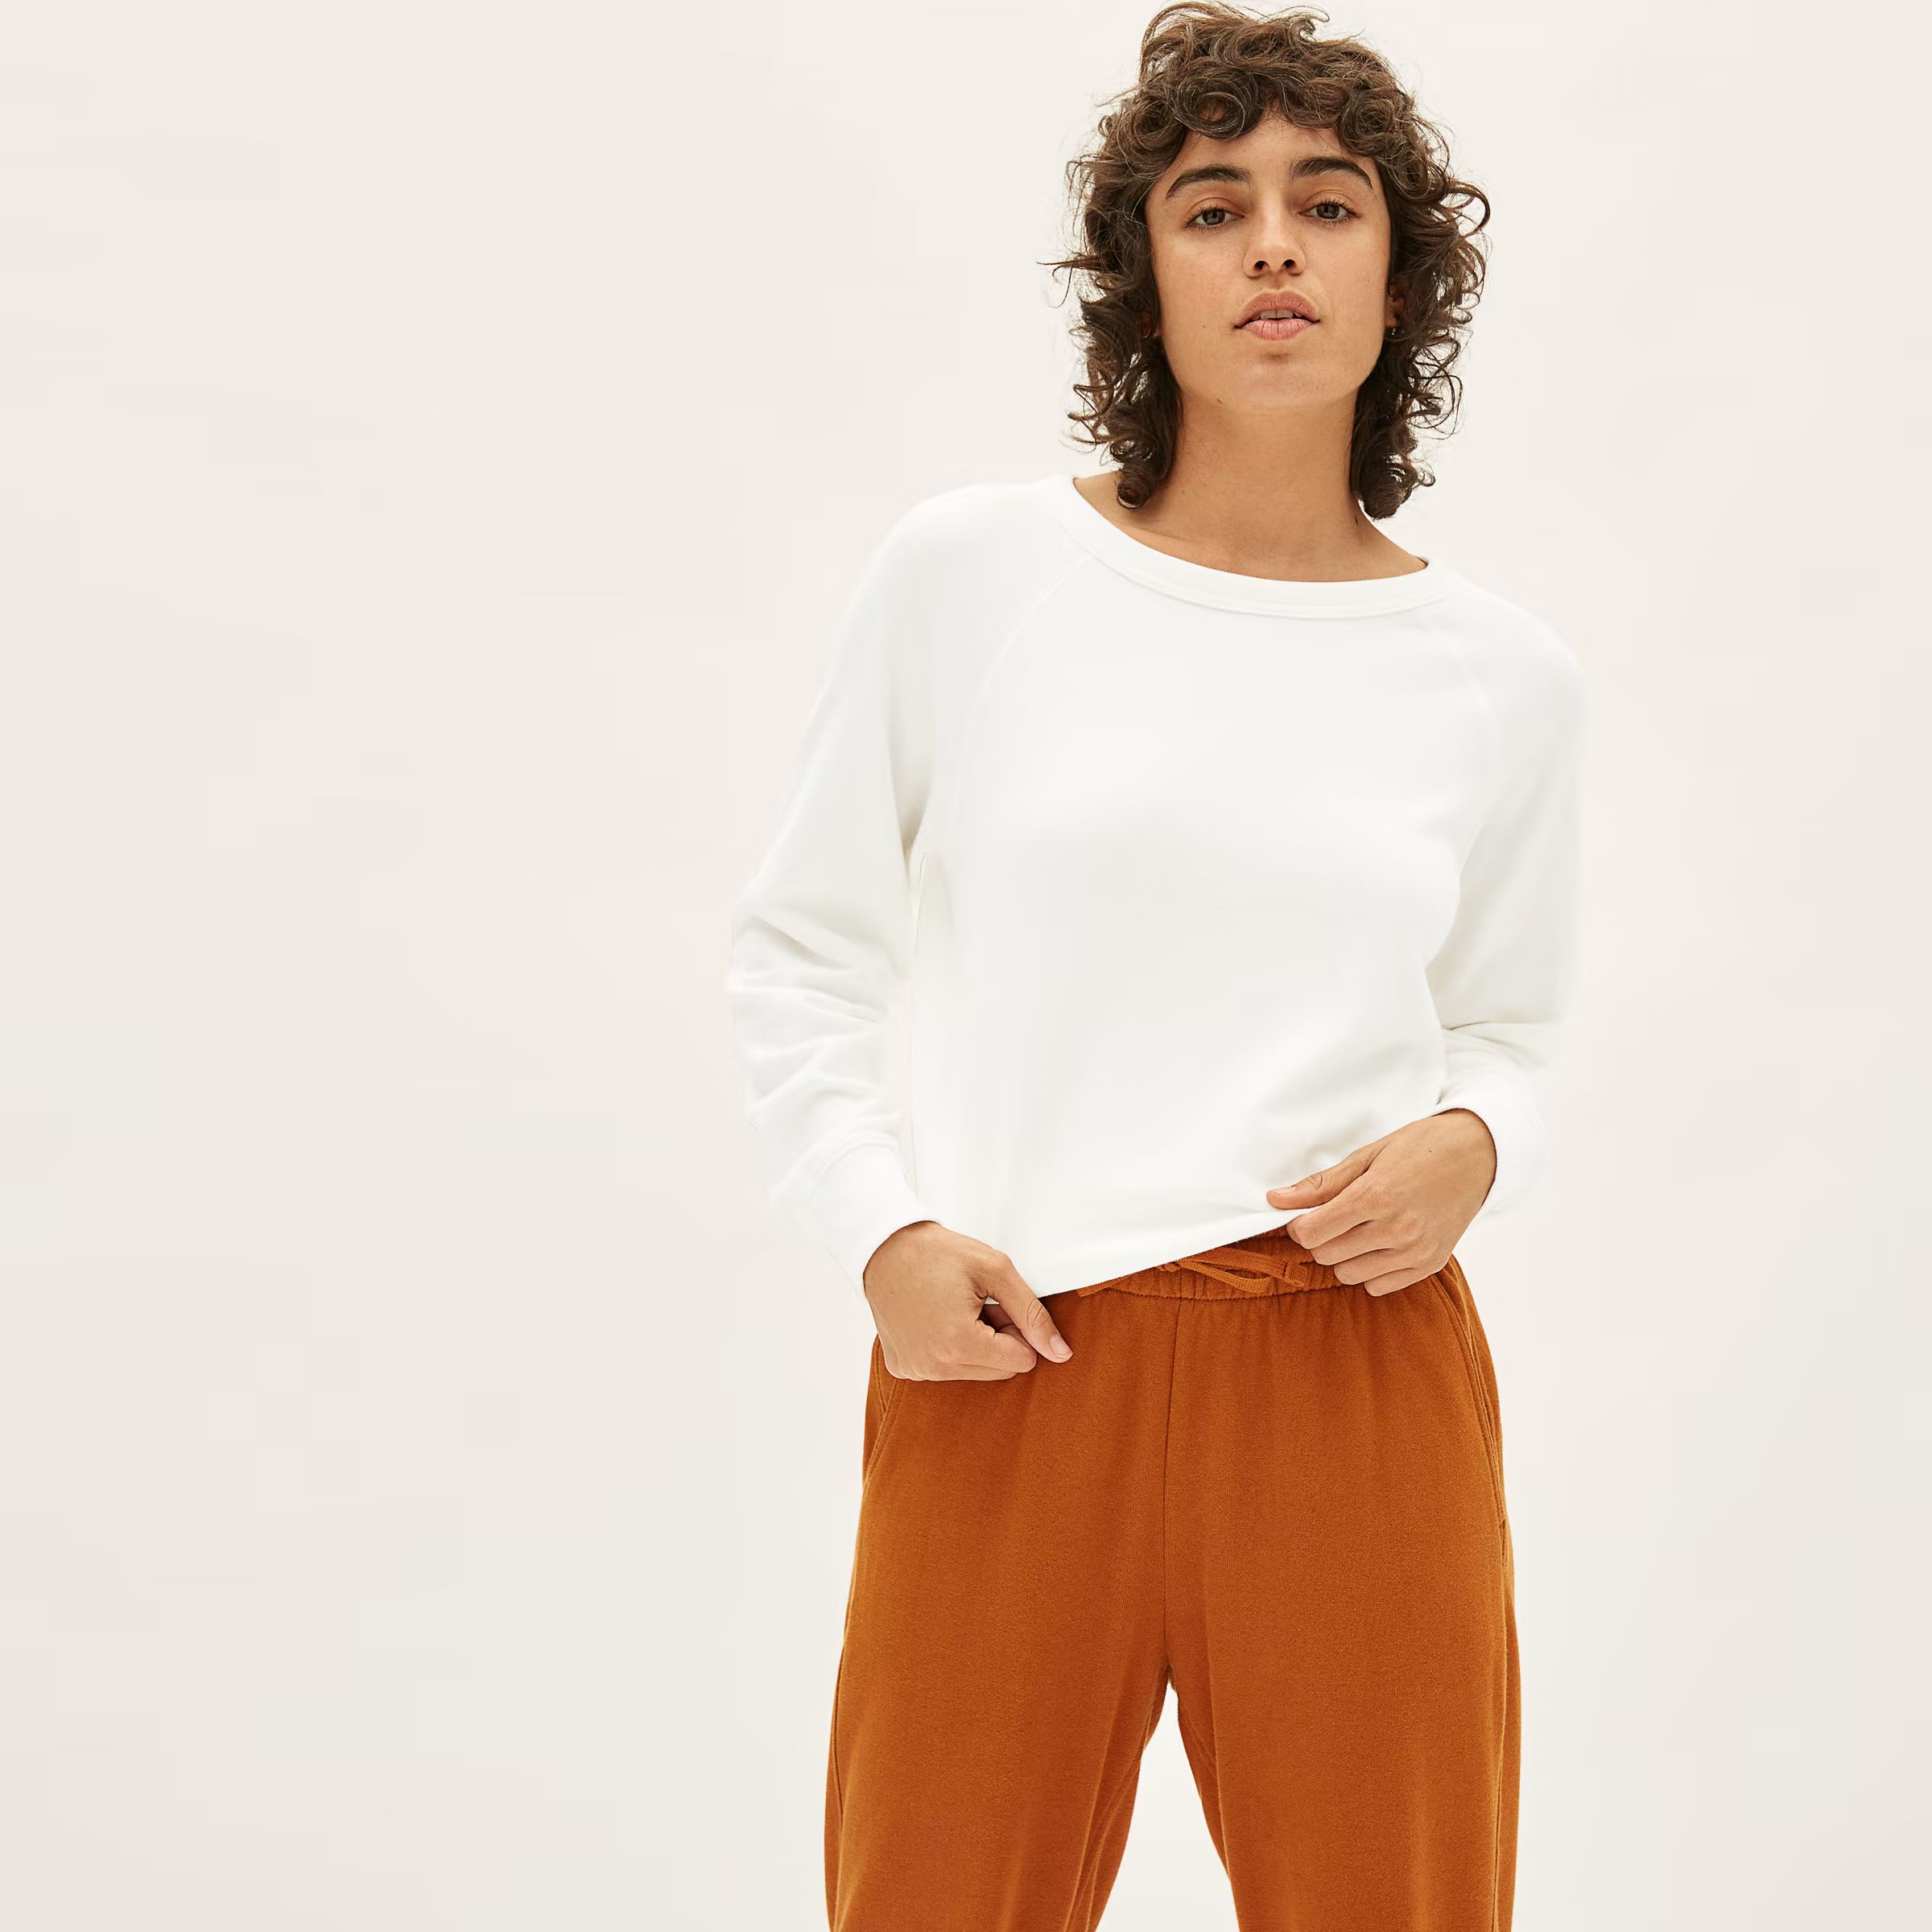 The Lightweight French Terry Crew | Everlane